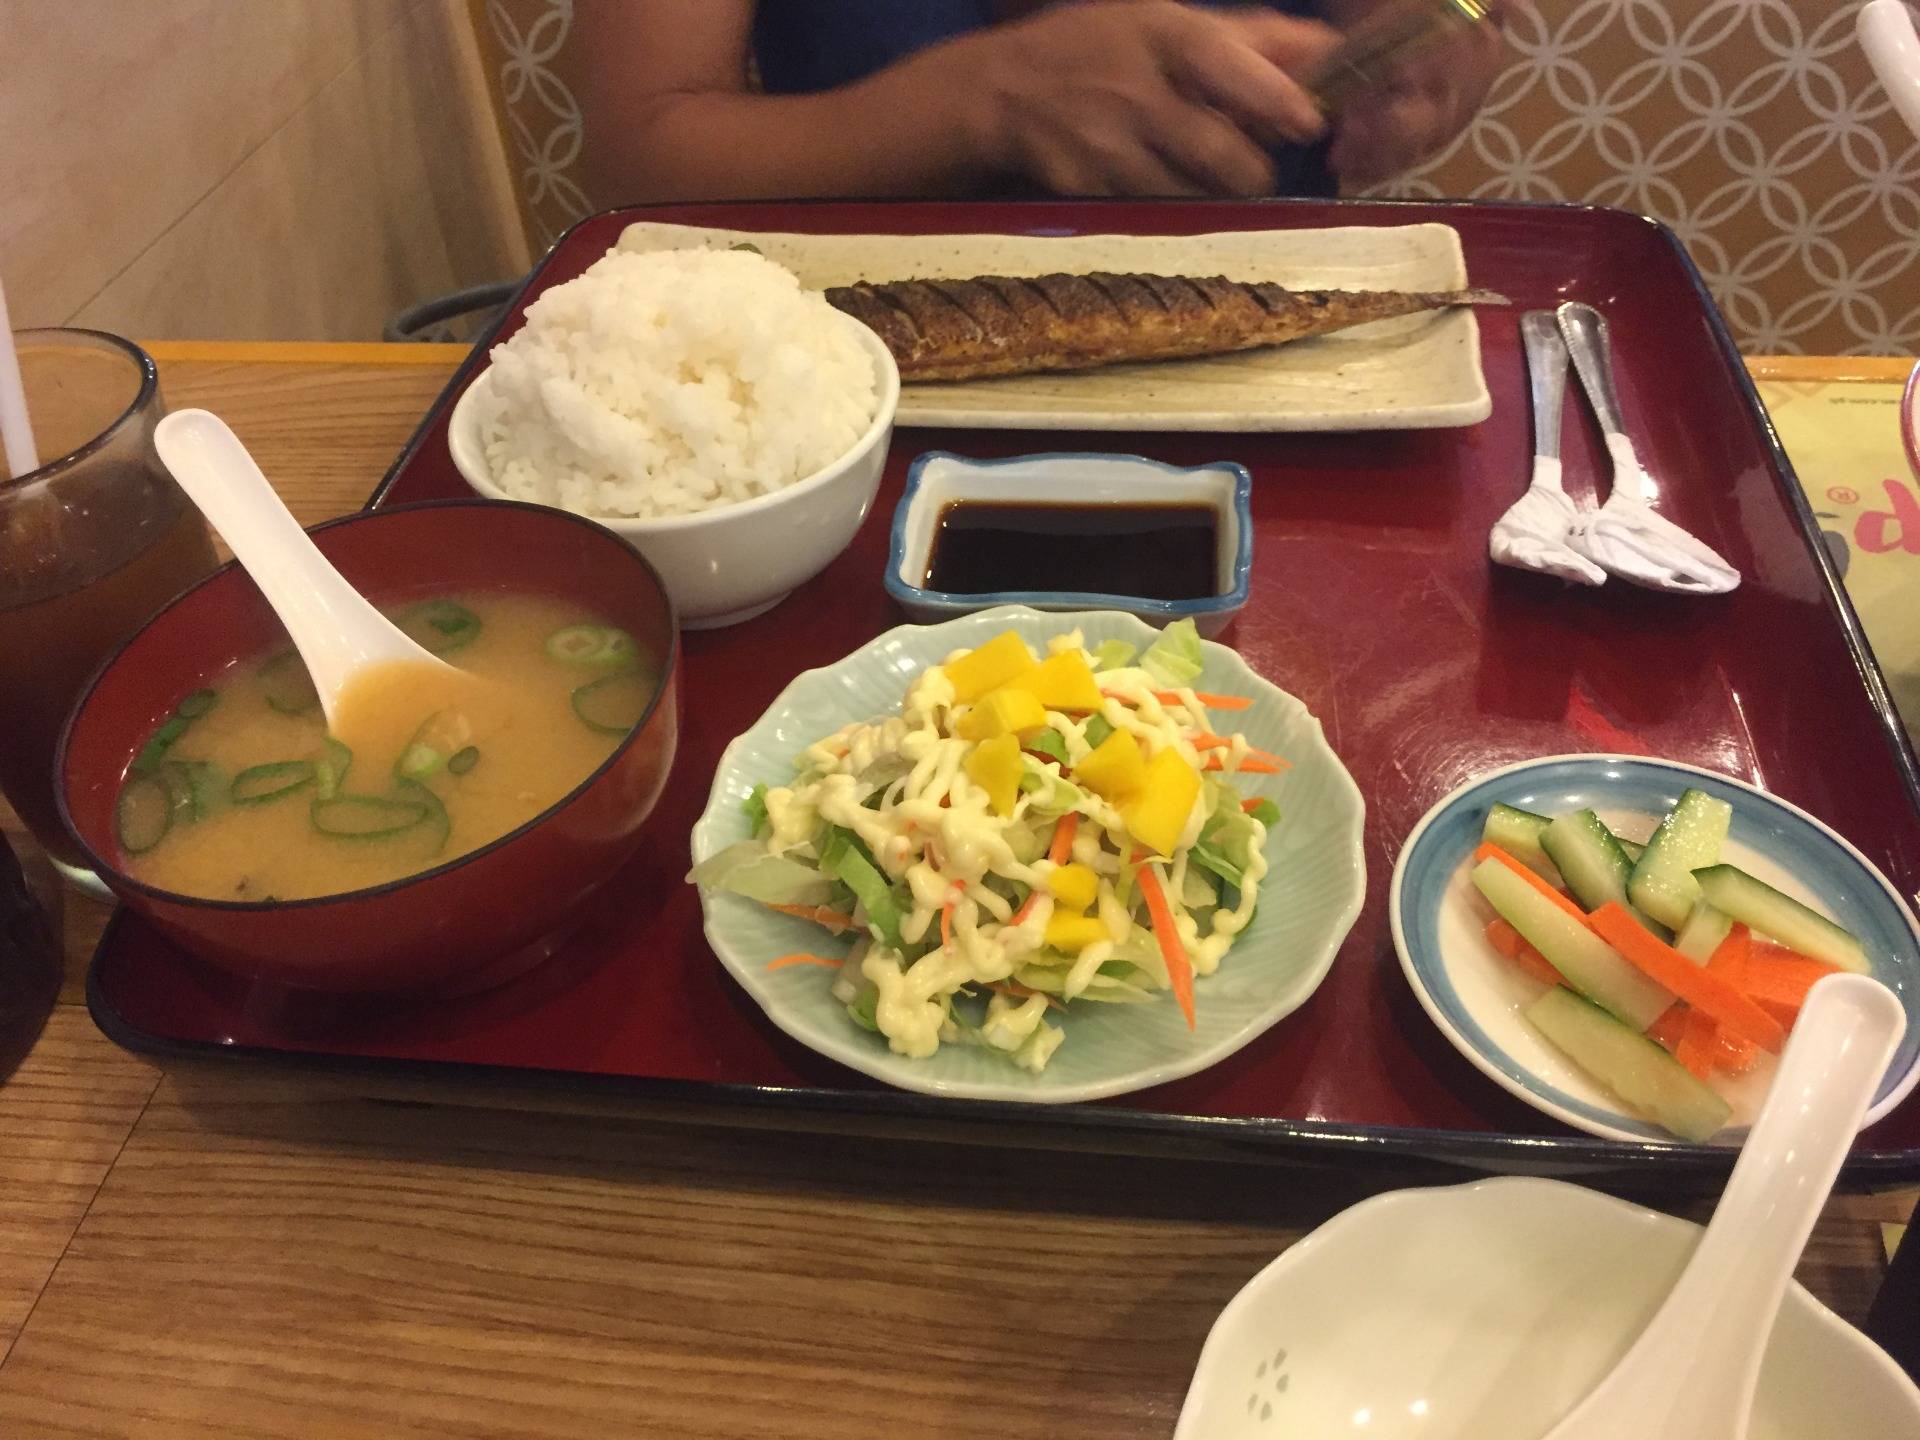 Fried fish with miso soup, mixed veggies with salad dressing, sliced cucumbers and carrots with one cup of rice.